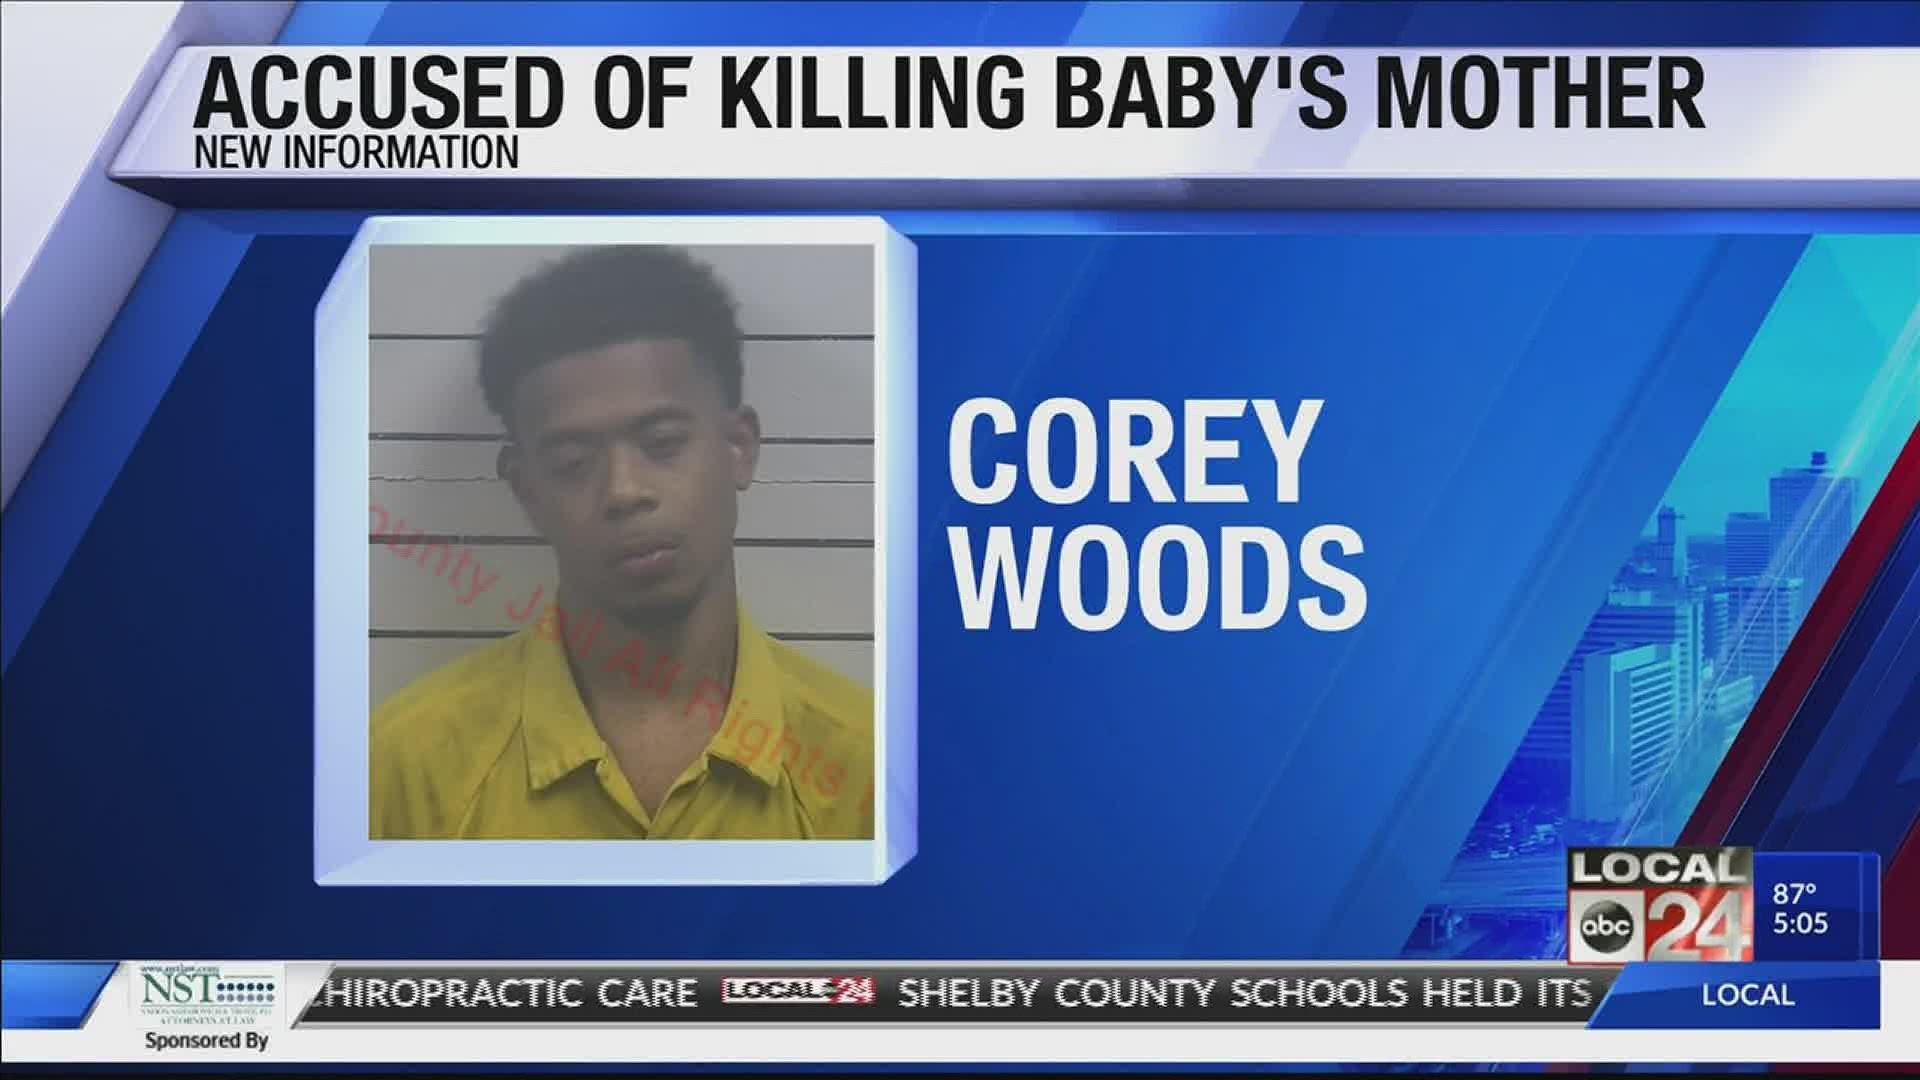 Corey Woods is behind bars in the DeSoto County Jail.